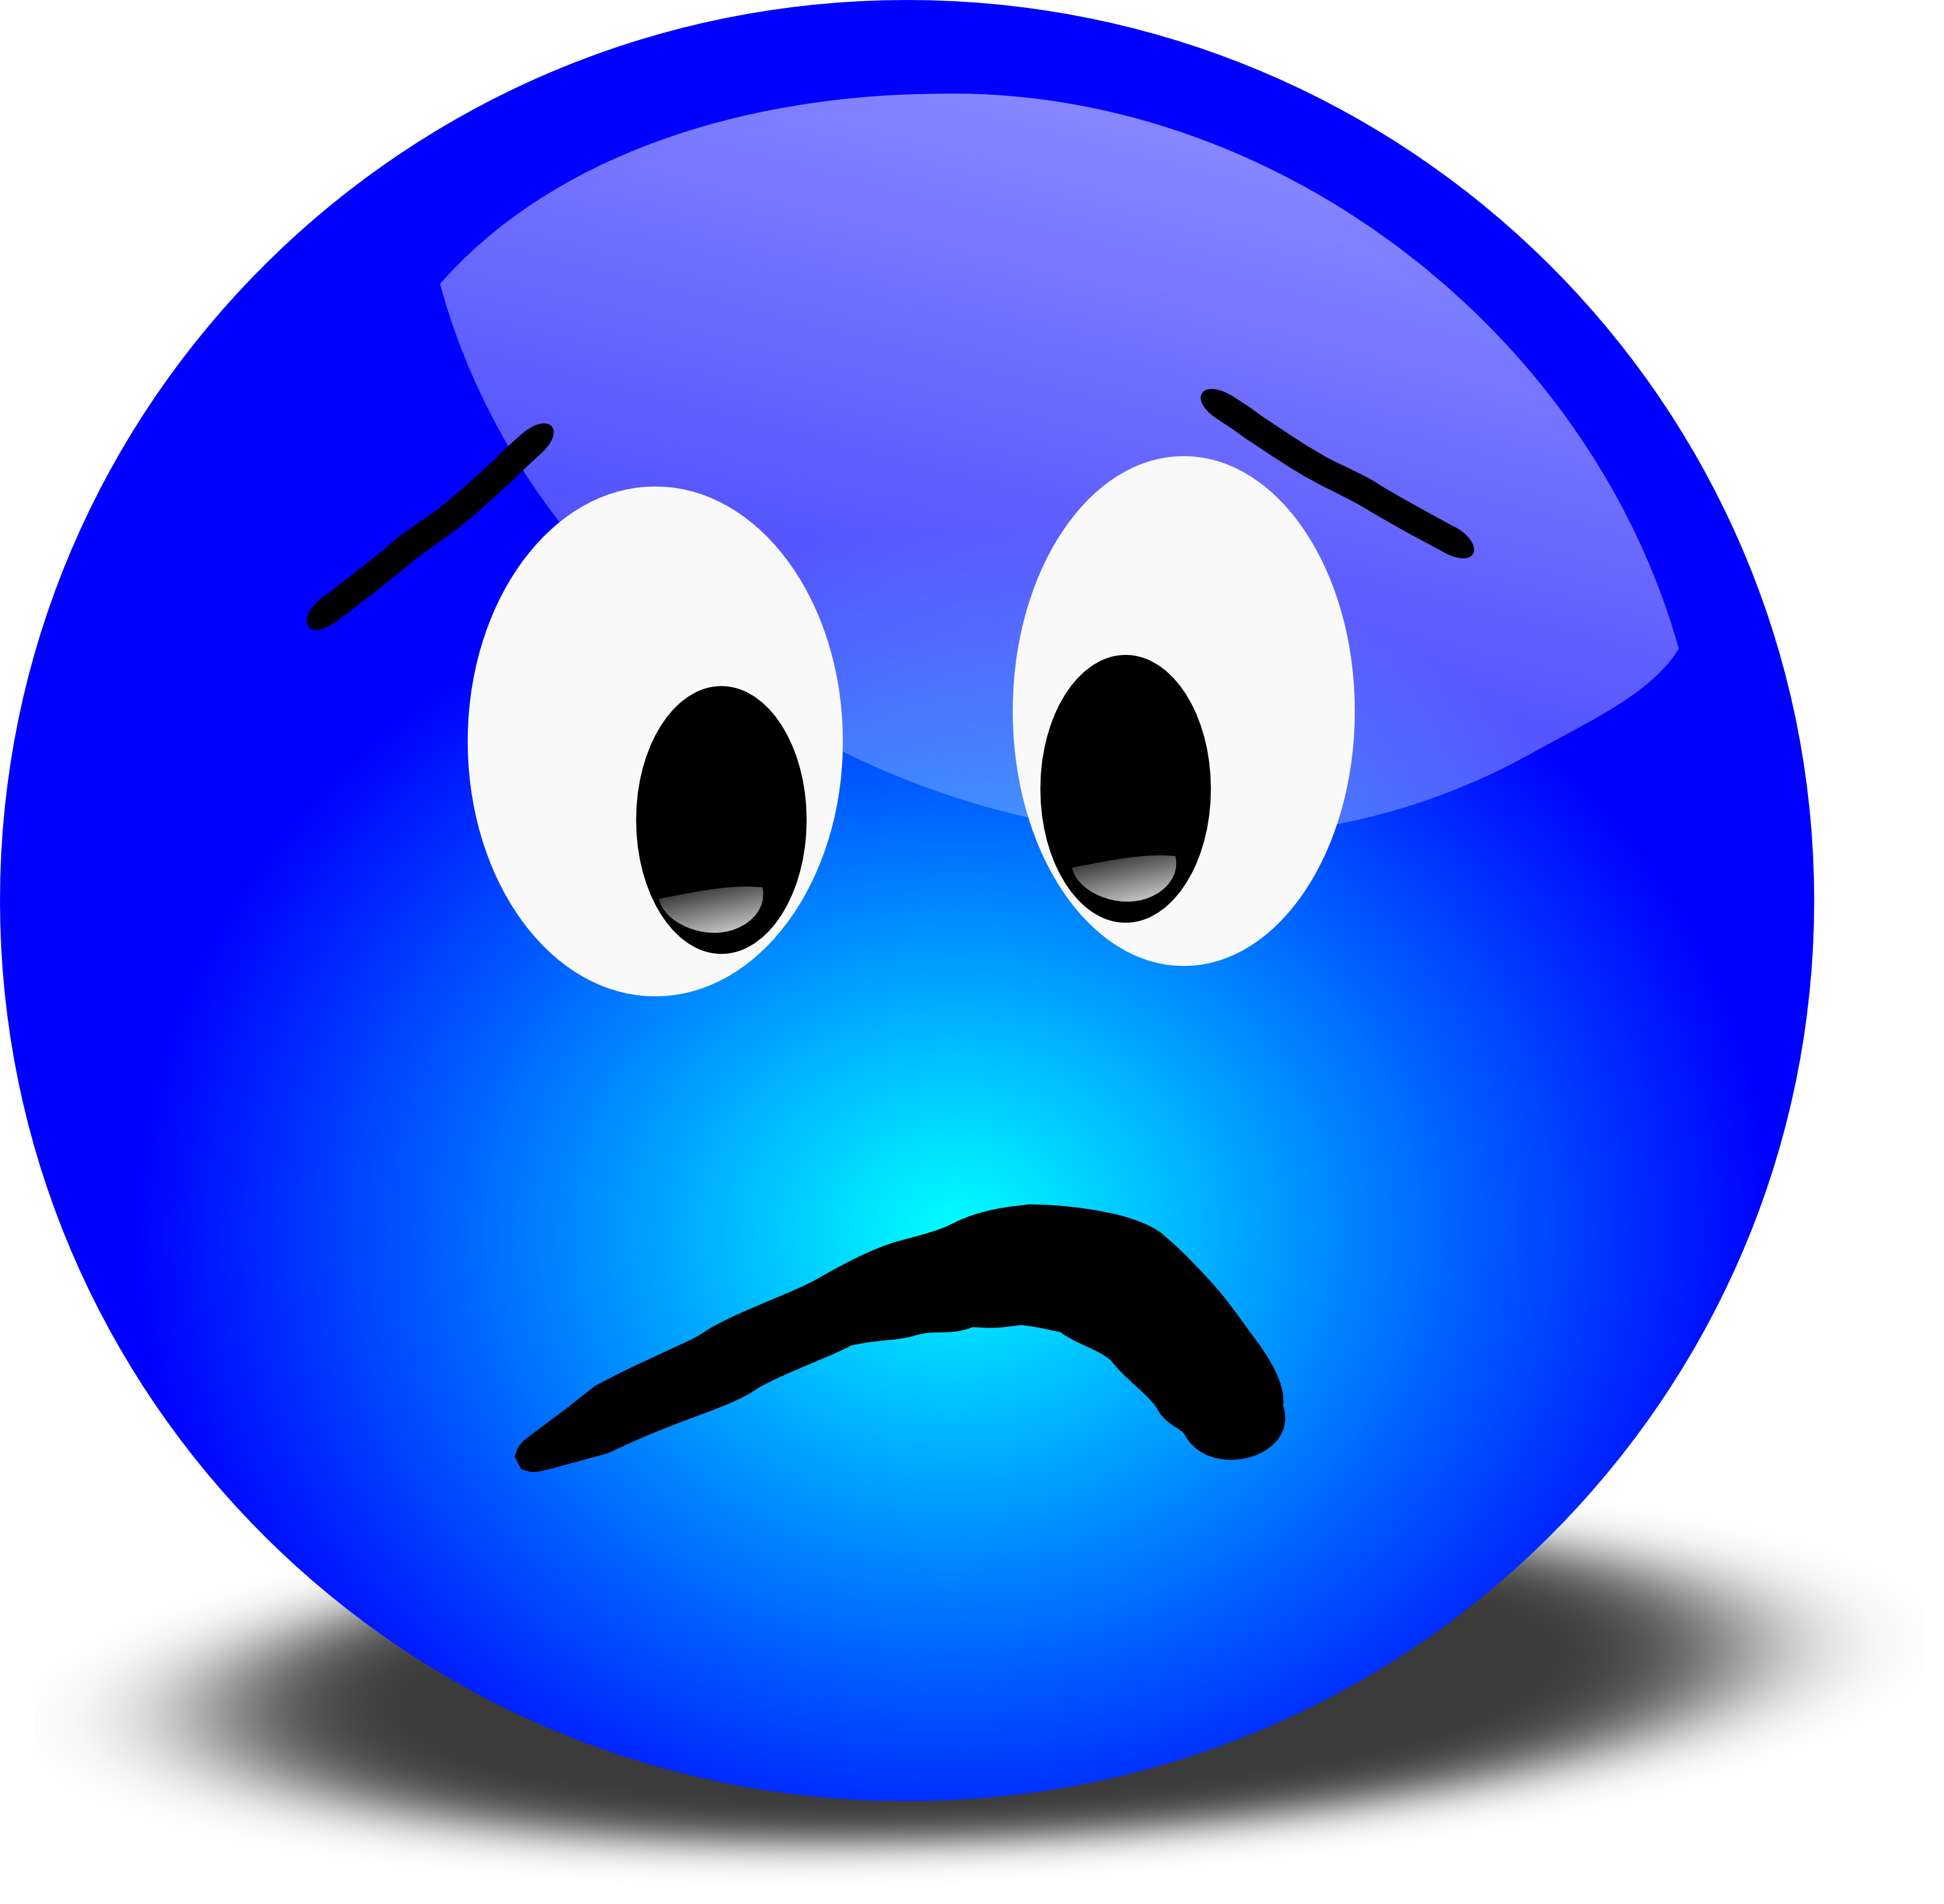 Wallpapers Animated Sad Faces Angry Smiley Clip Art I . 3200x3134 ...